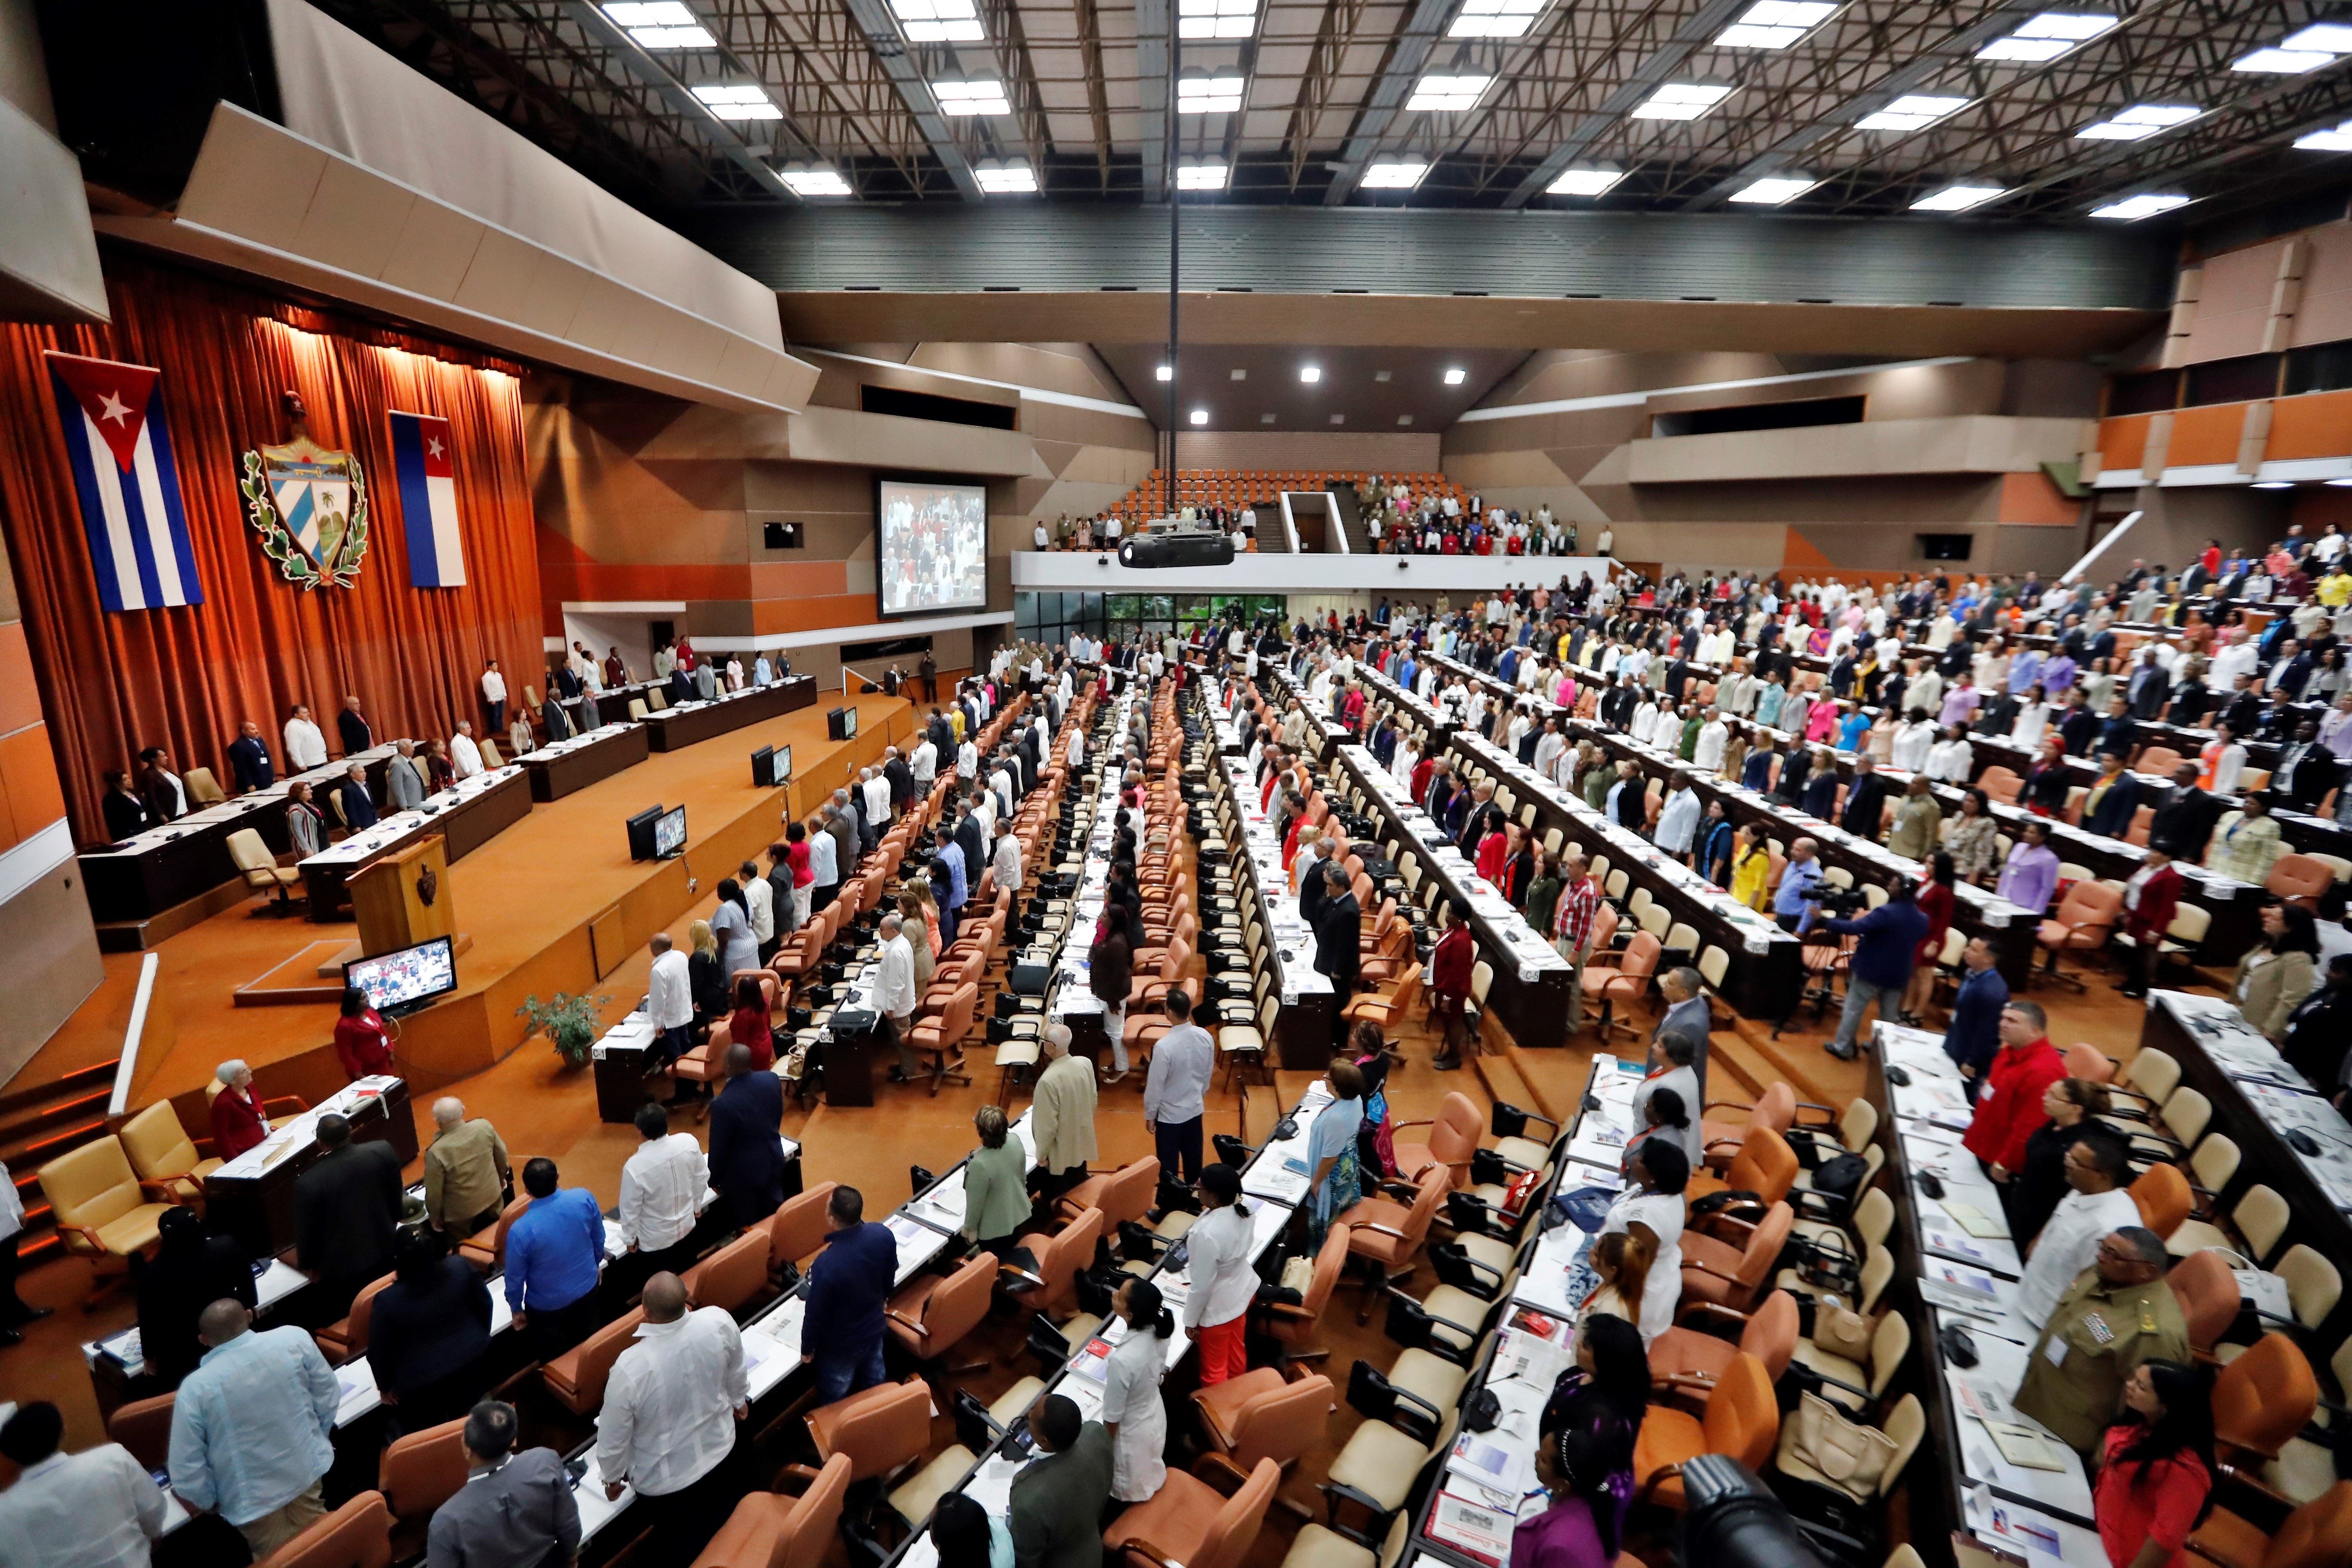 Archive photo of a session of the National Assembly of People's Power of Cuba (EFE/Ernesto Mastrascusa)